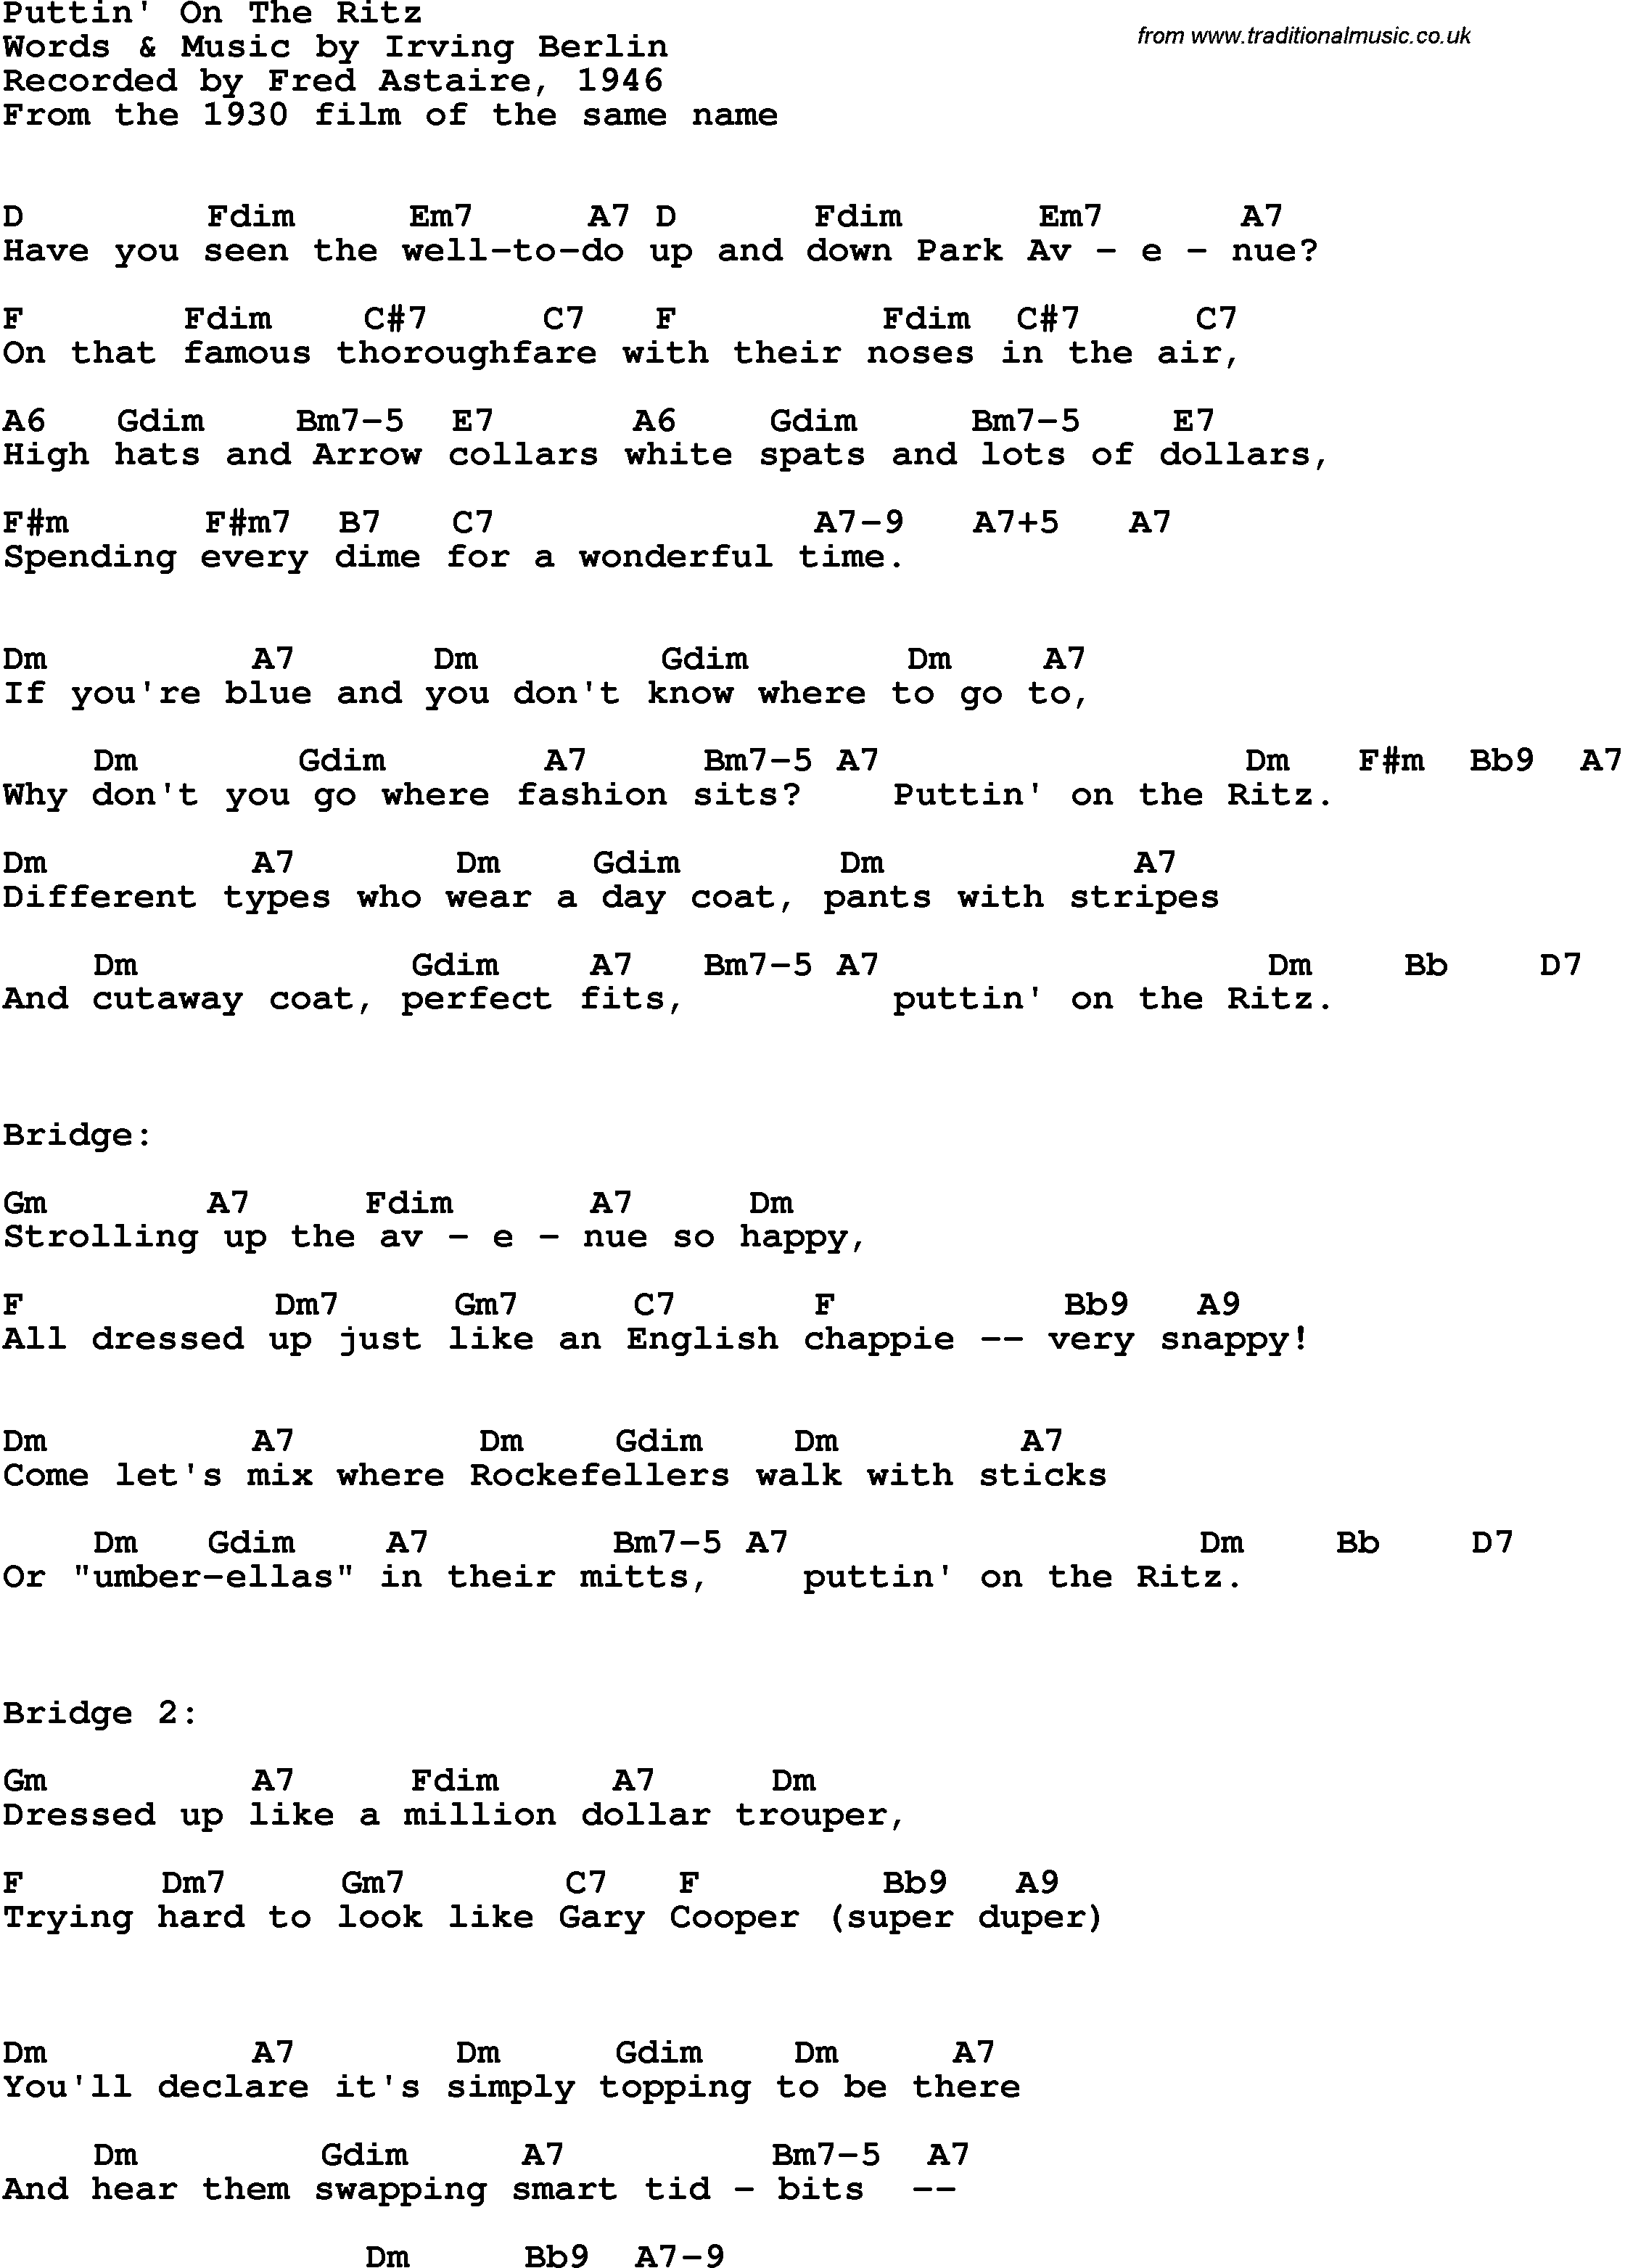 Song Lyrics with guitar chords for Puttin' On The Ritz  - Fred Astaire, 1946